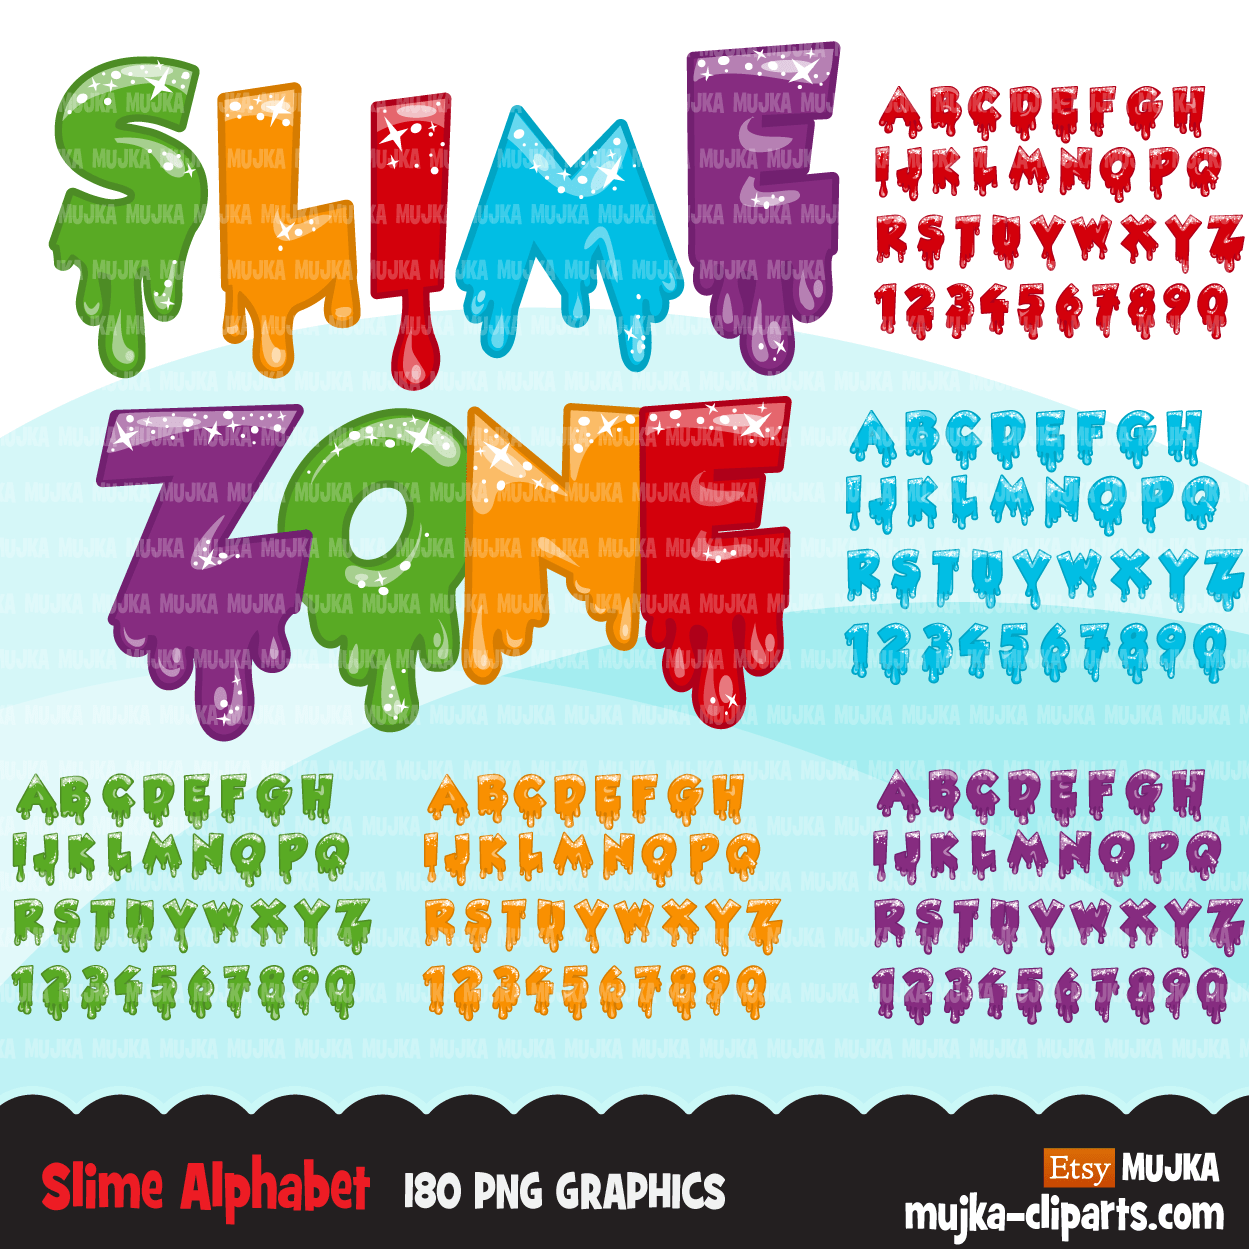 Slime Party clipart Bundle. Collection of cute slime elements, colorful dripping splashes backgrounds and boy girl characters